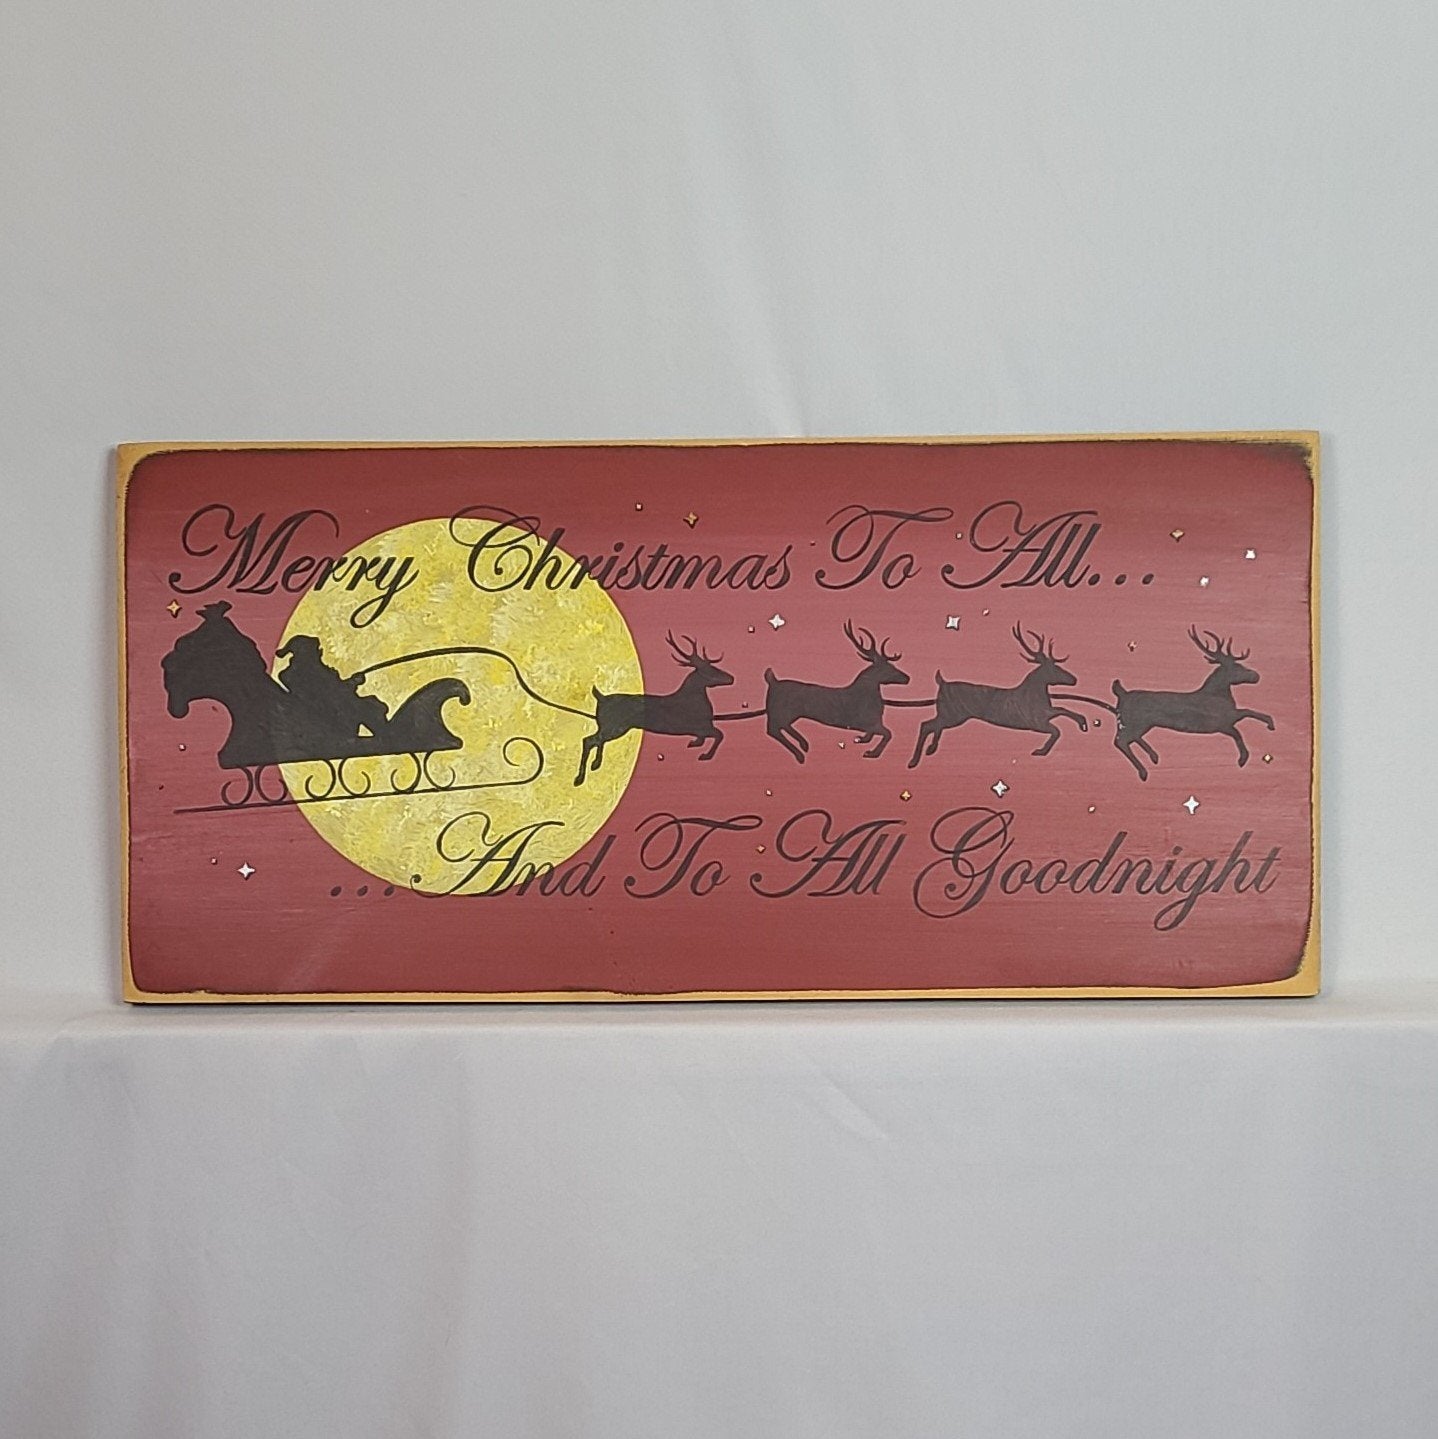 Merry Christmas Santa's Sleigh To All A Goodnight Wooden Sign red